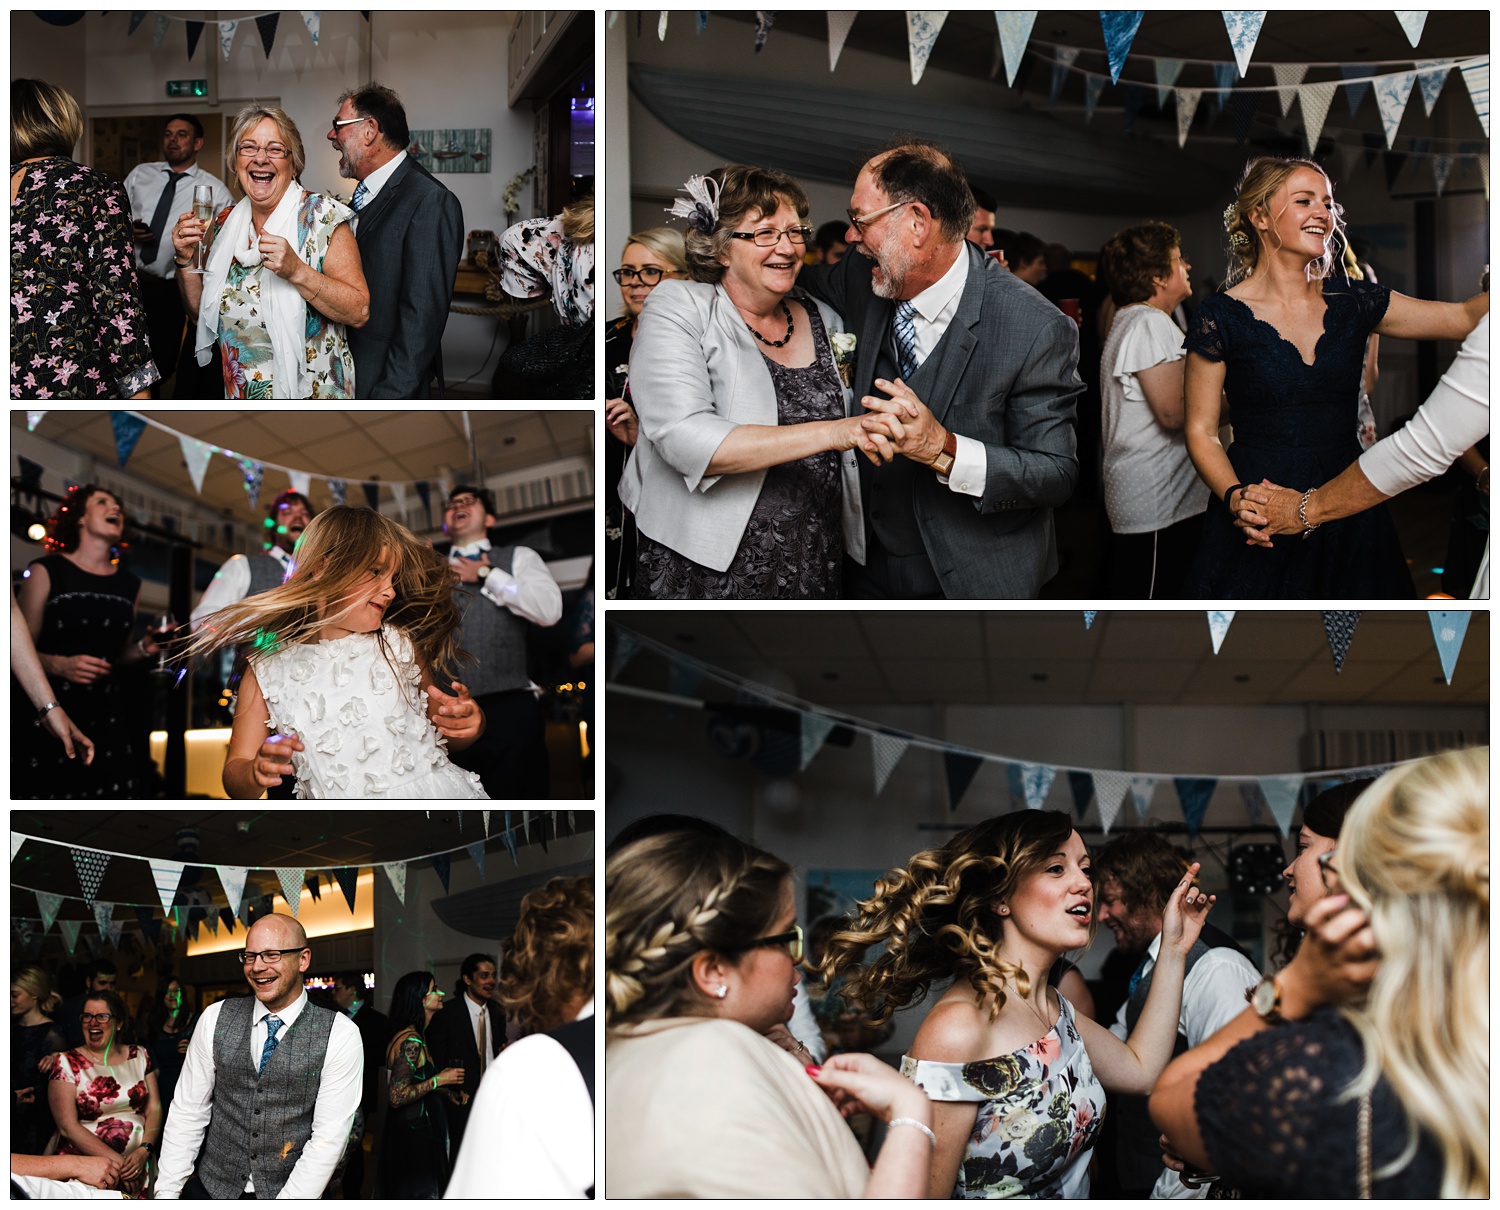 A selection of candid wedding photographs from a packed dance floor. Couples are dancing, a girl is shaking her hair.